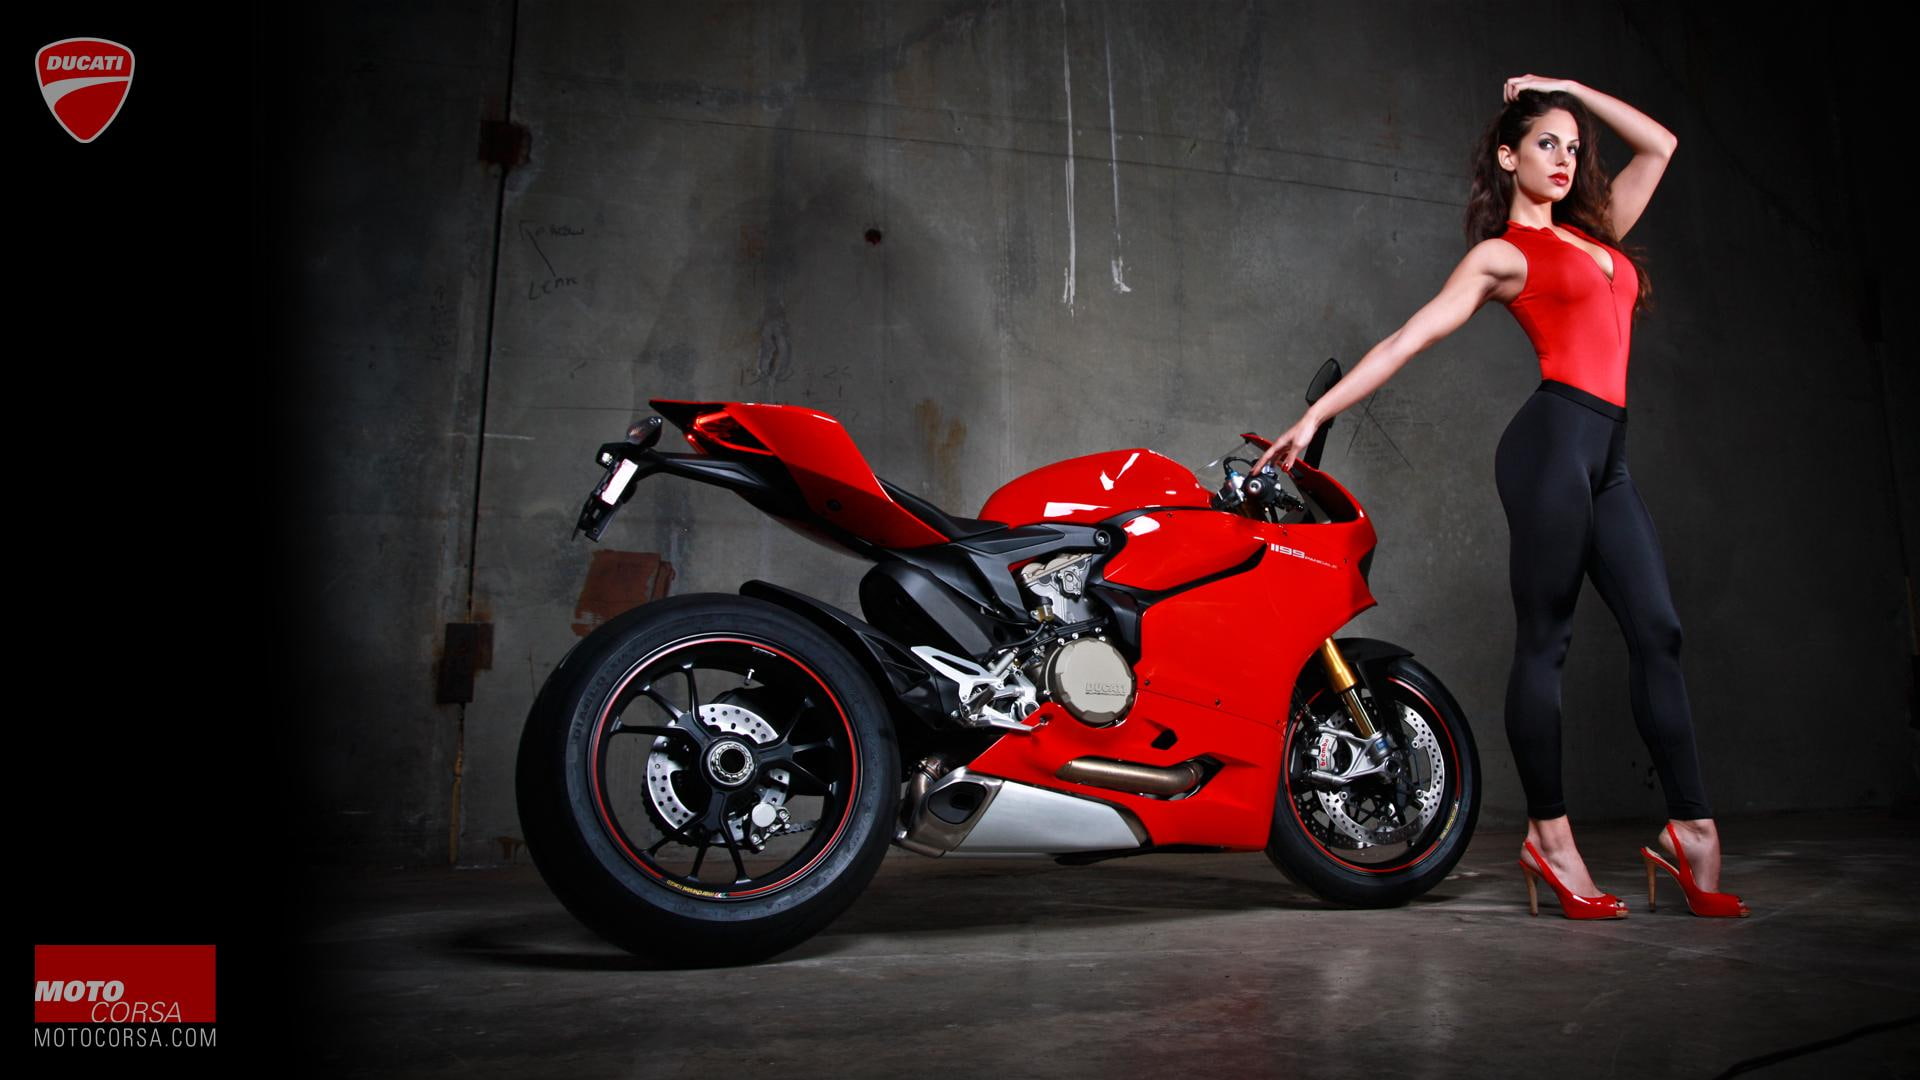 Seductive Ducati 1199 Panigale Photo 12, red and black sport bike; women's red v neck sleeveless shirt, black pants and red stilettos outfit